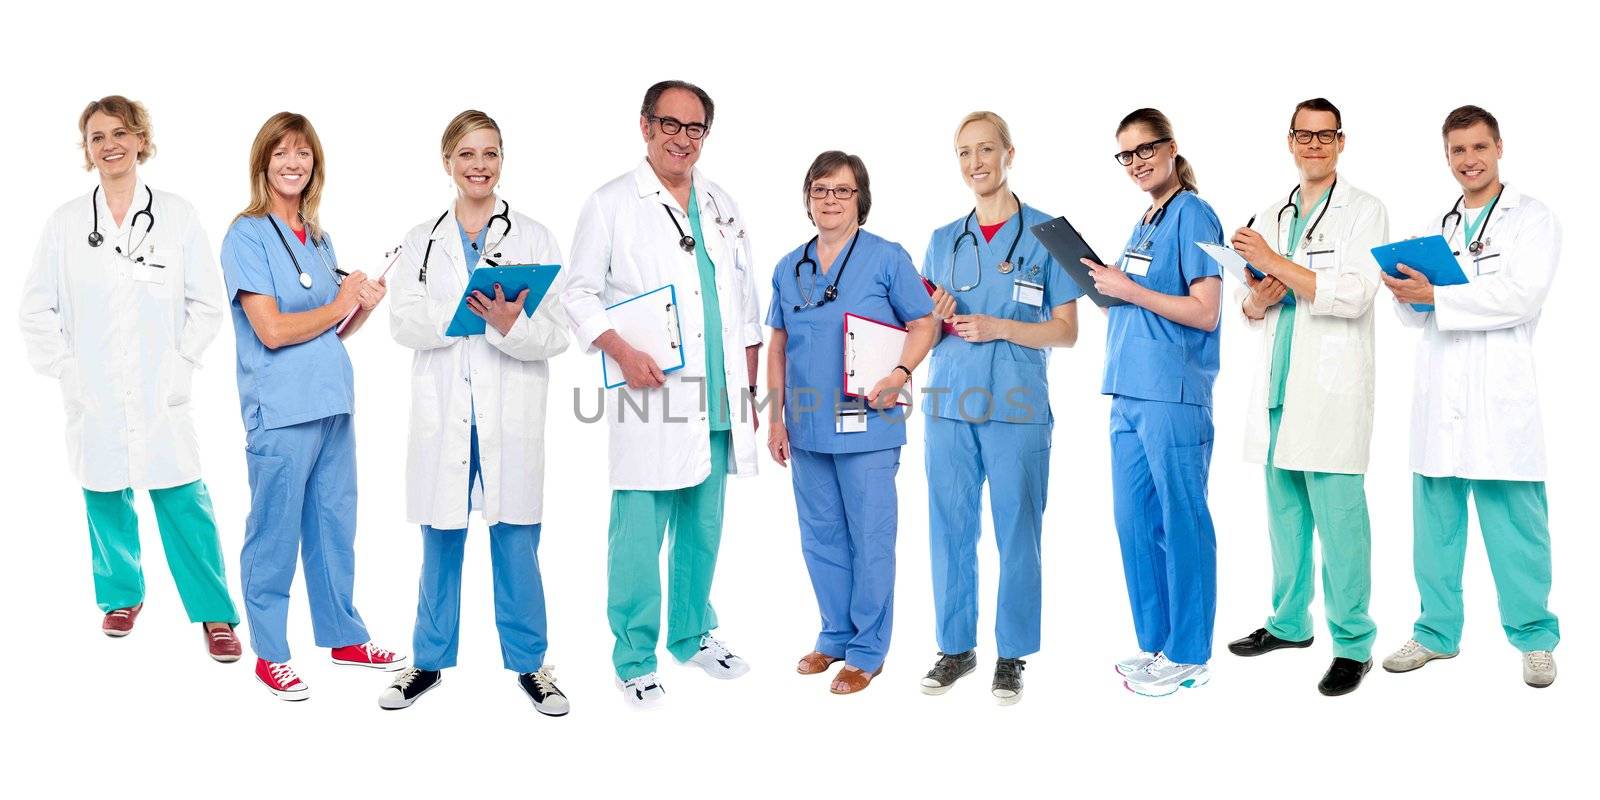 Group of medical experts at your service smiling confidently. Stay fit and healthy.